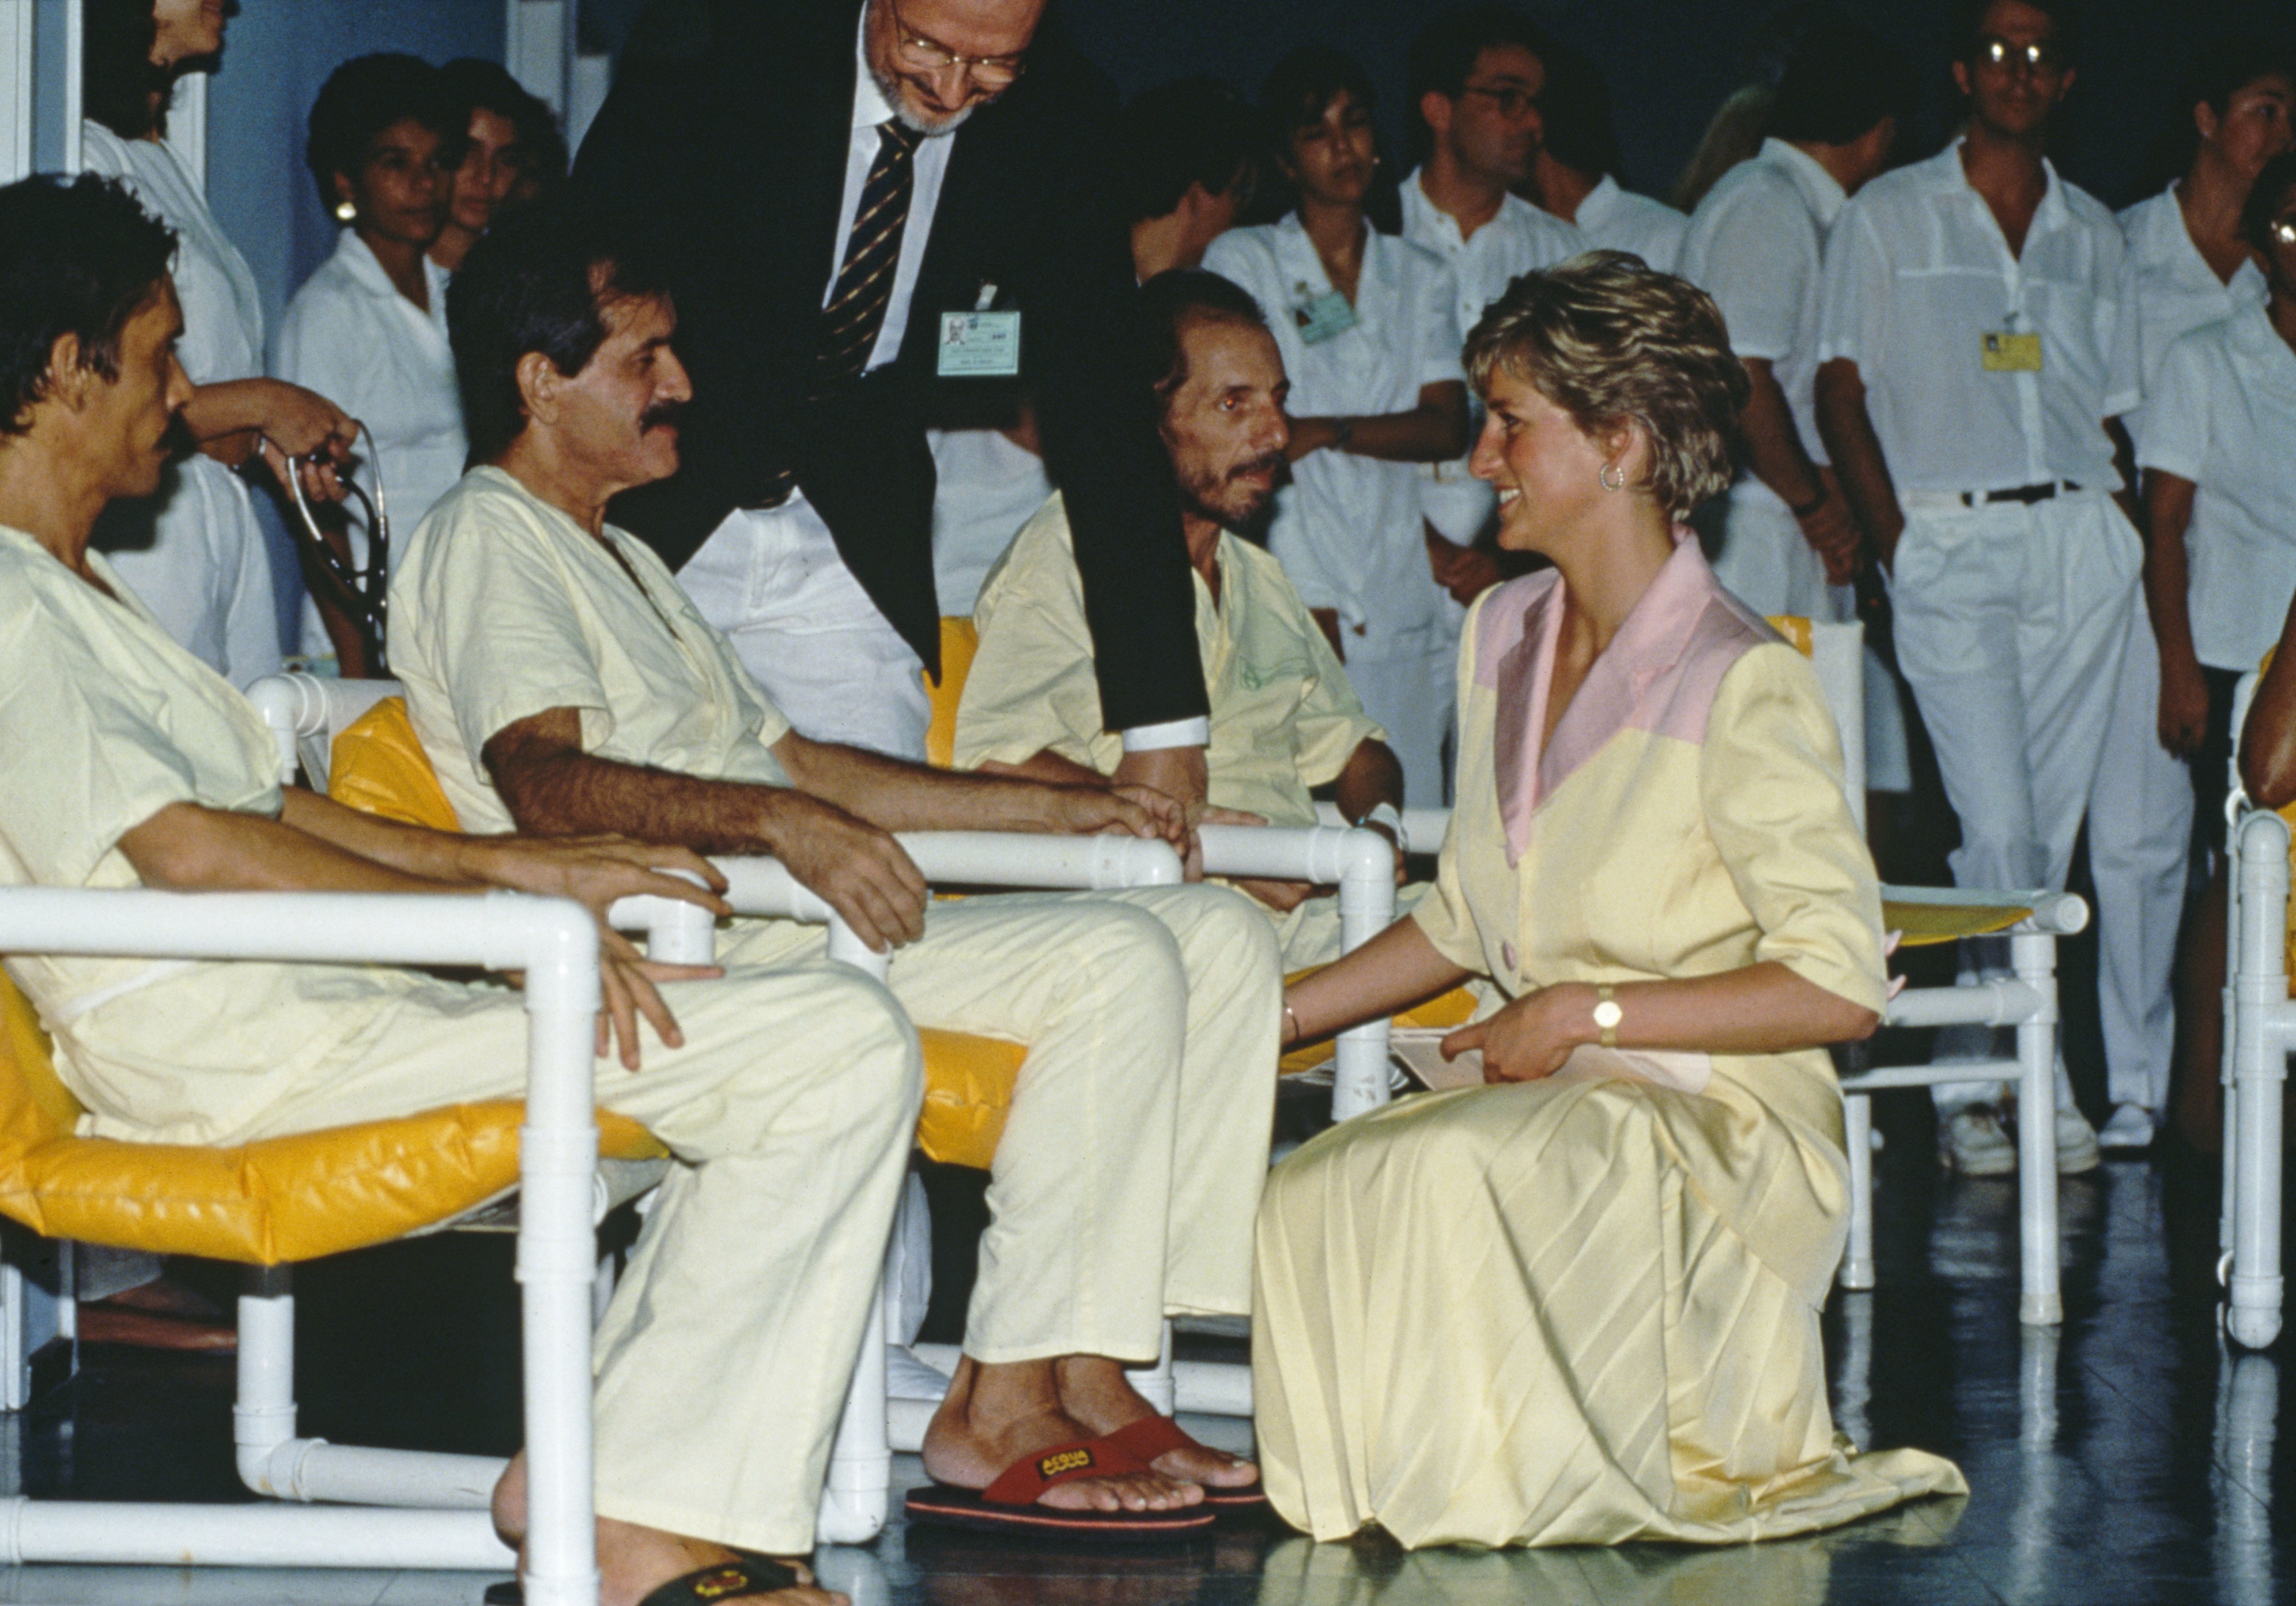 Diana, Princess of Wales (1961 - 1997) visiting patients suffering from AIDS at the Hospital Universidade in Rio de Janeiro, Brazil, 25th April 1991. | Source: Getty Images